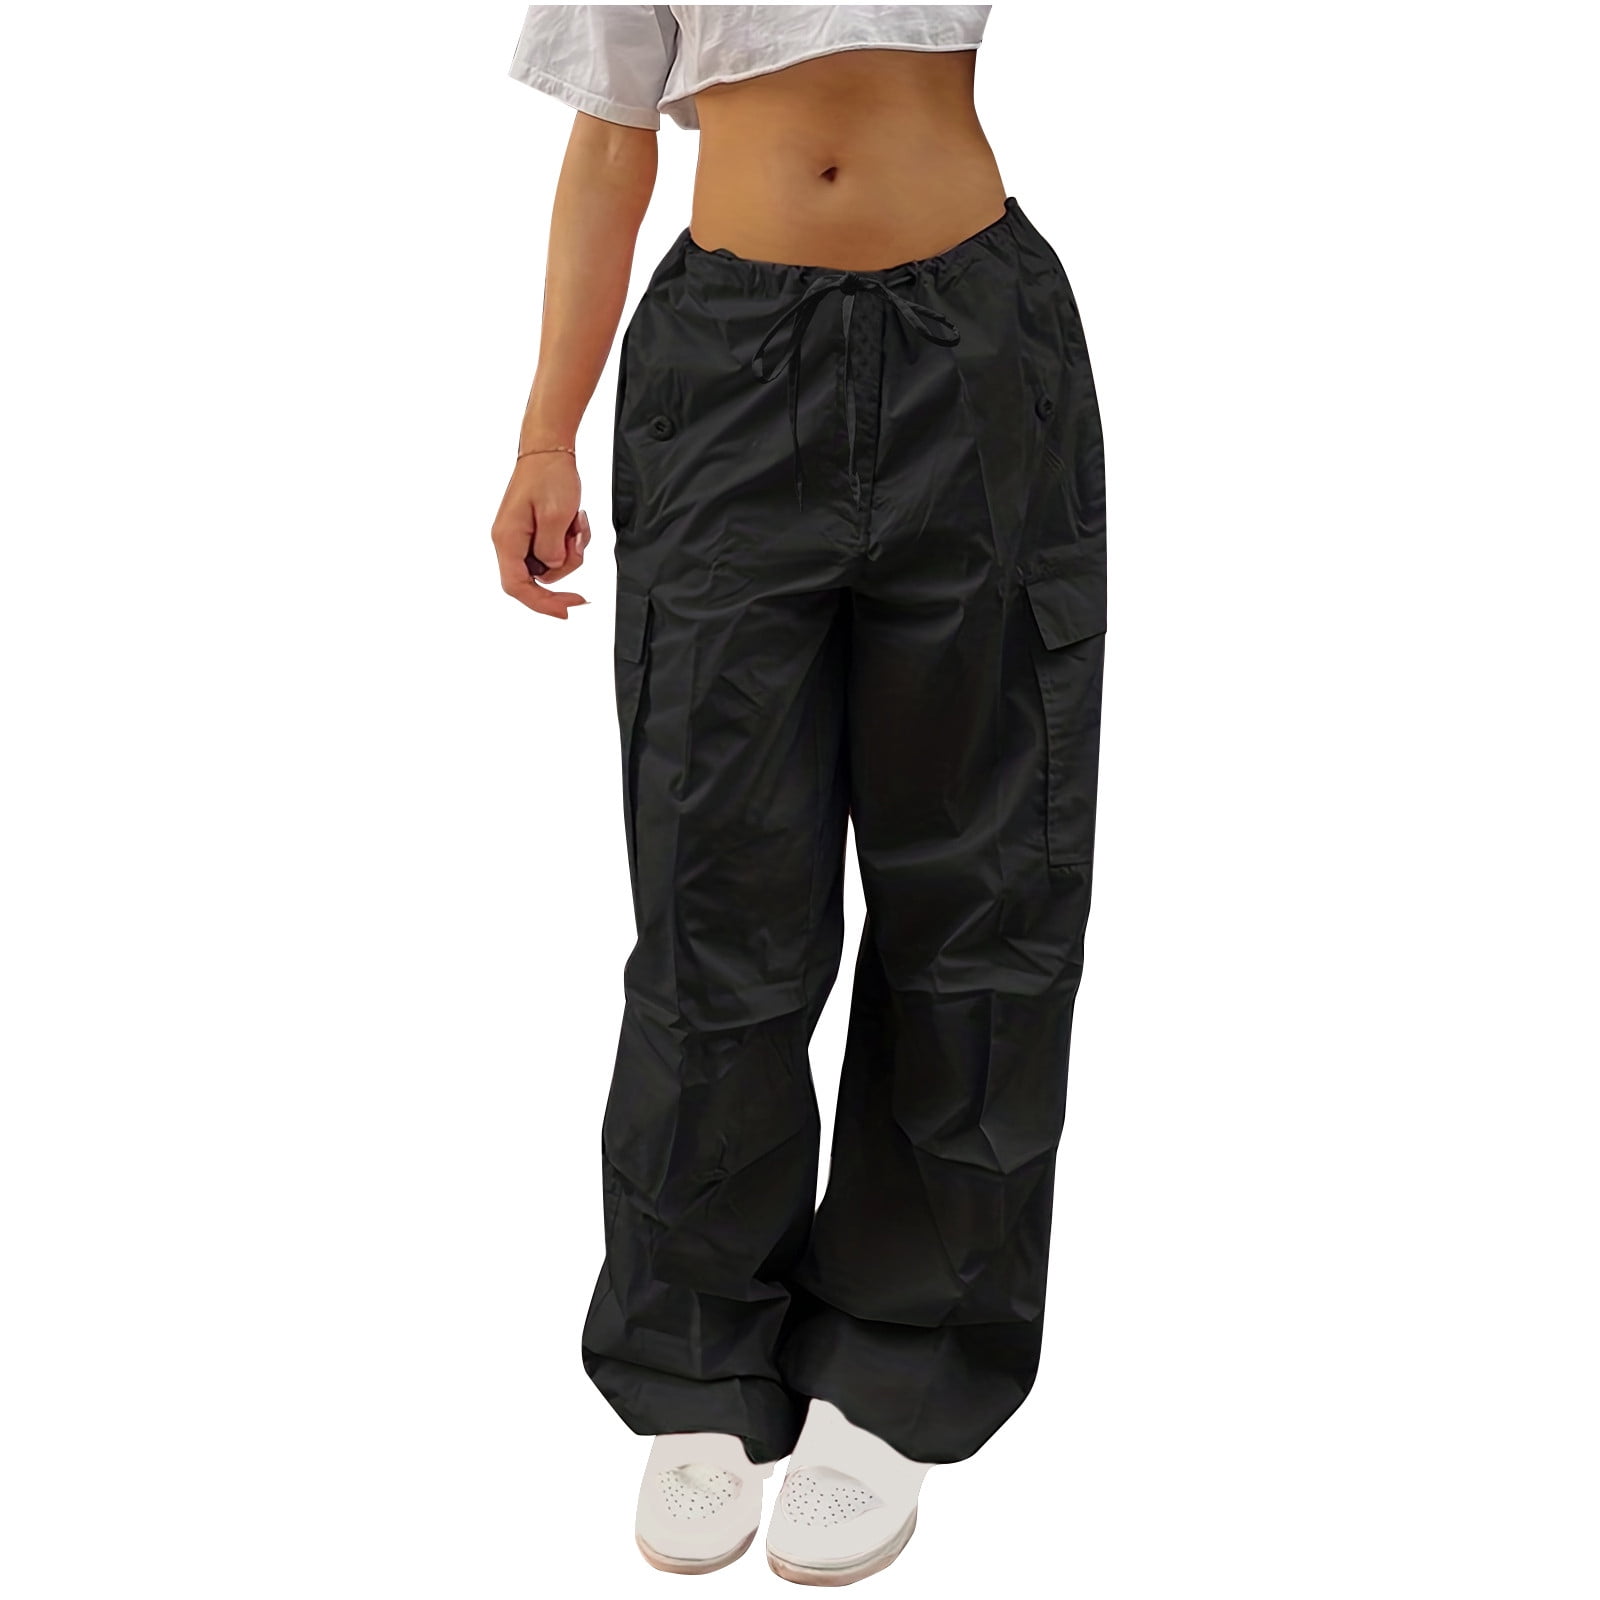 SMihono Clearance Teen Girls Full Length Trousers Women's Cargo Pants  Lightweight Joggers Pants With Elastic Waist Outdoor Hiking Athletic Casual